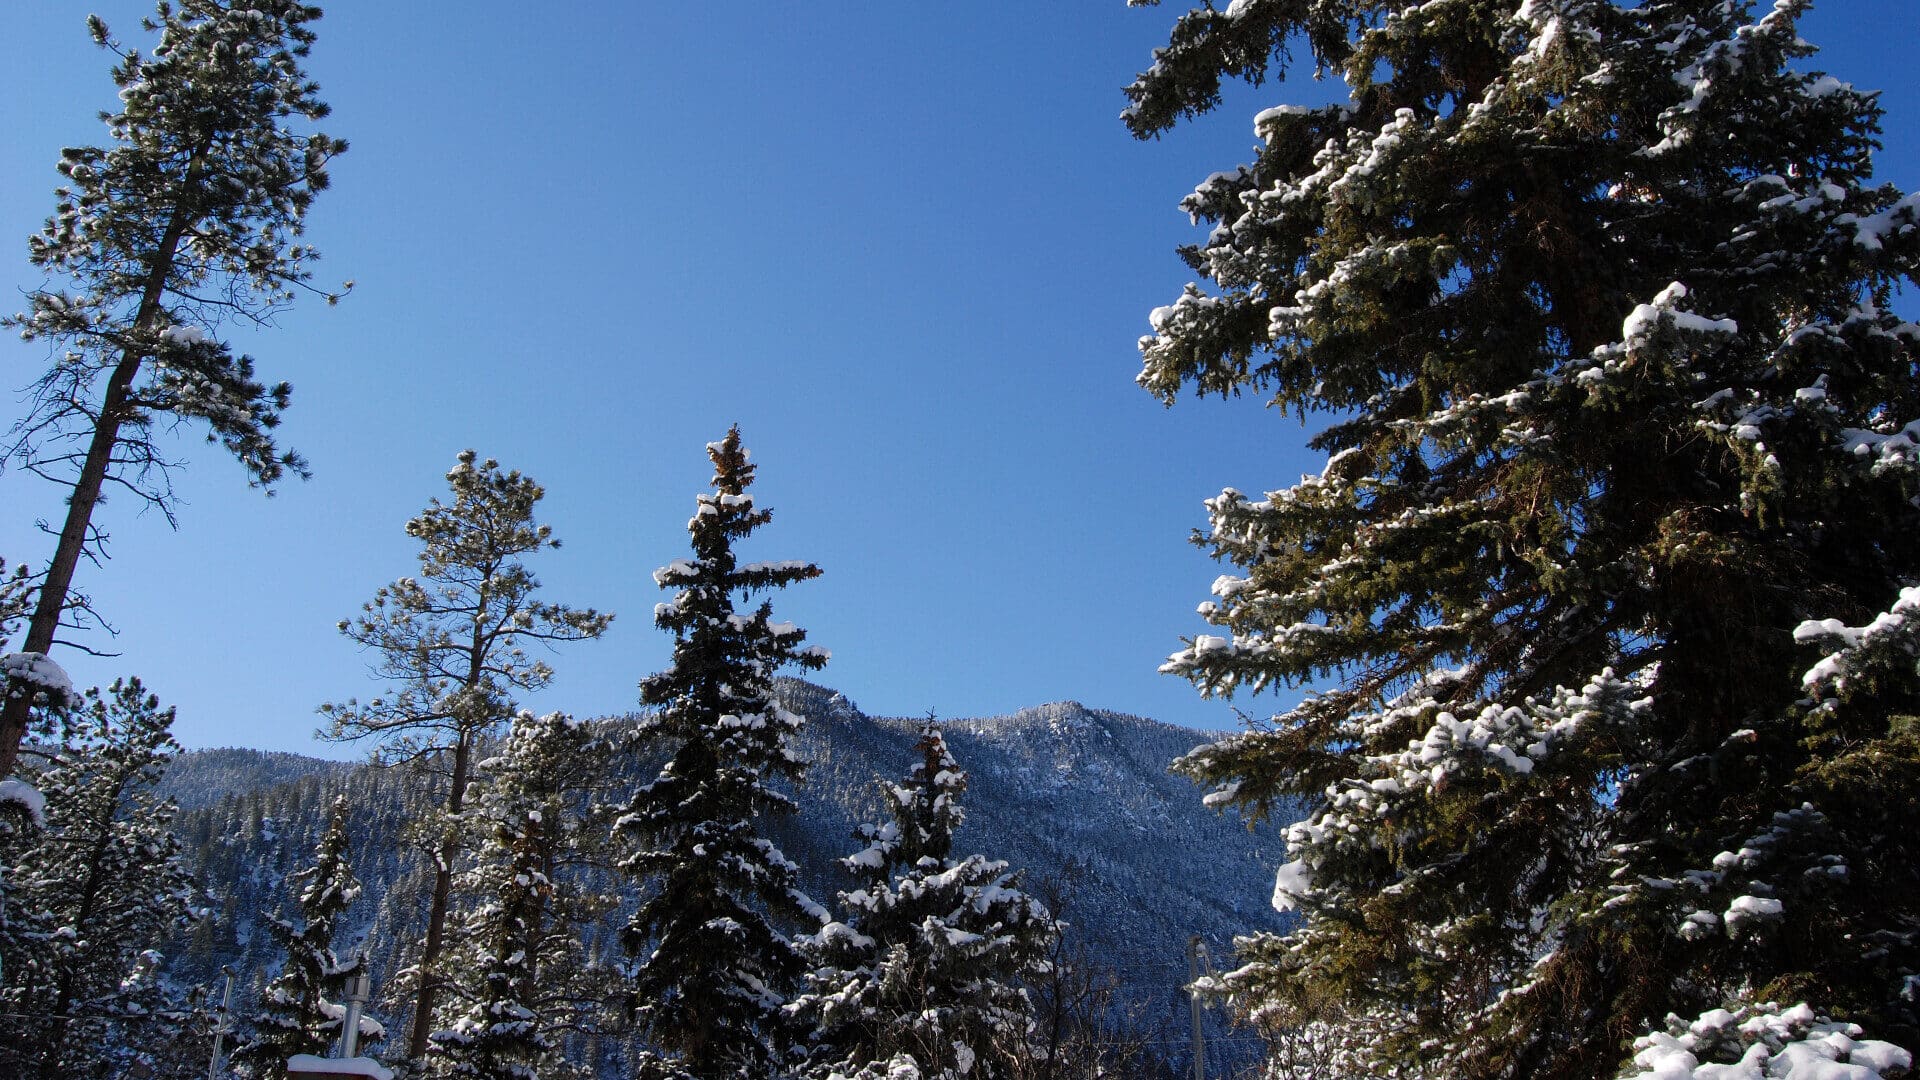 pine trees dusted with snow with a backdrop of mountains and blue skies